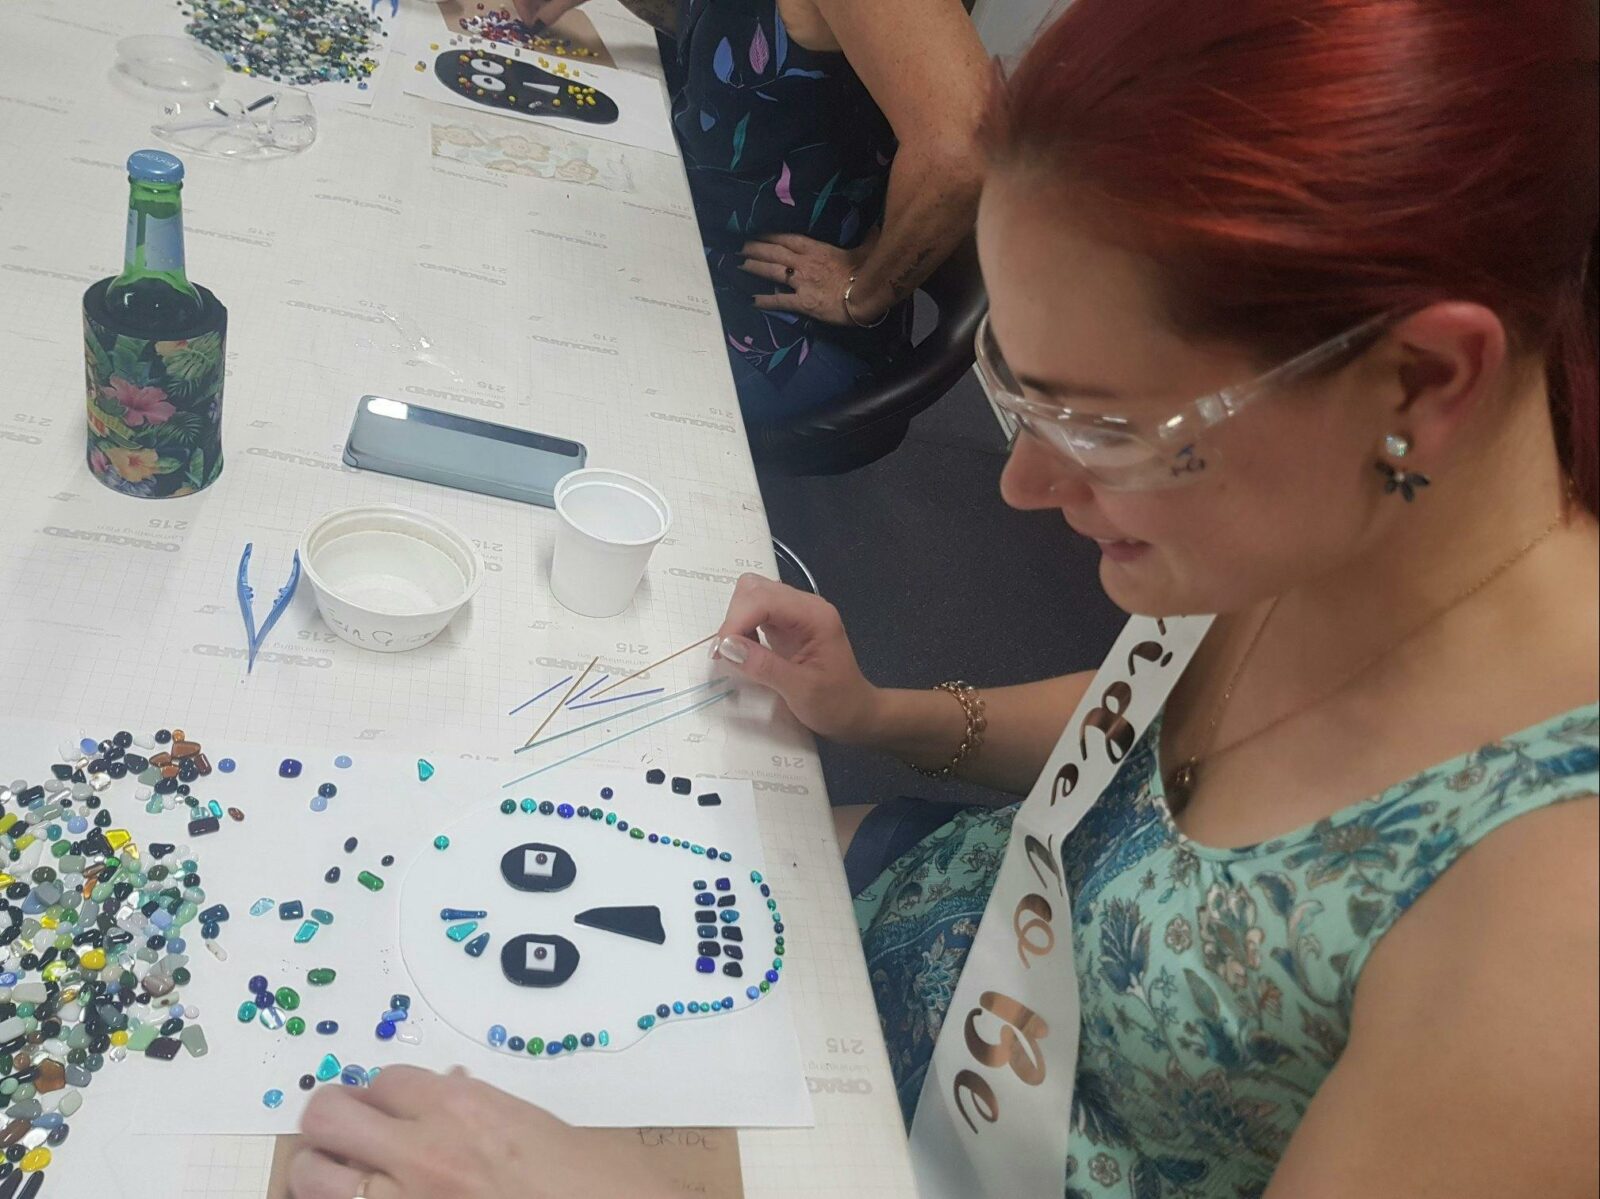 Student working with glass project, create a themed haloween sugar skull plate